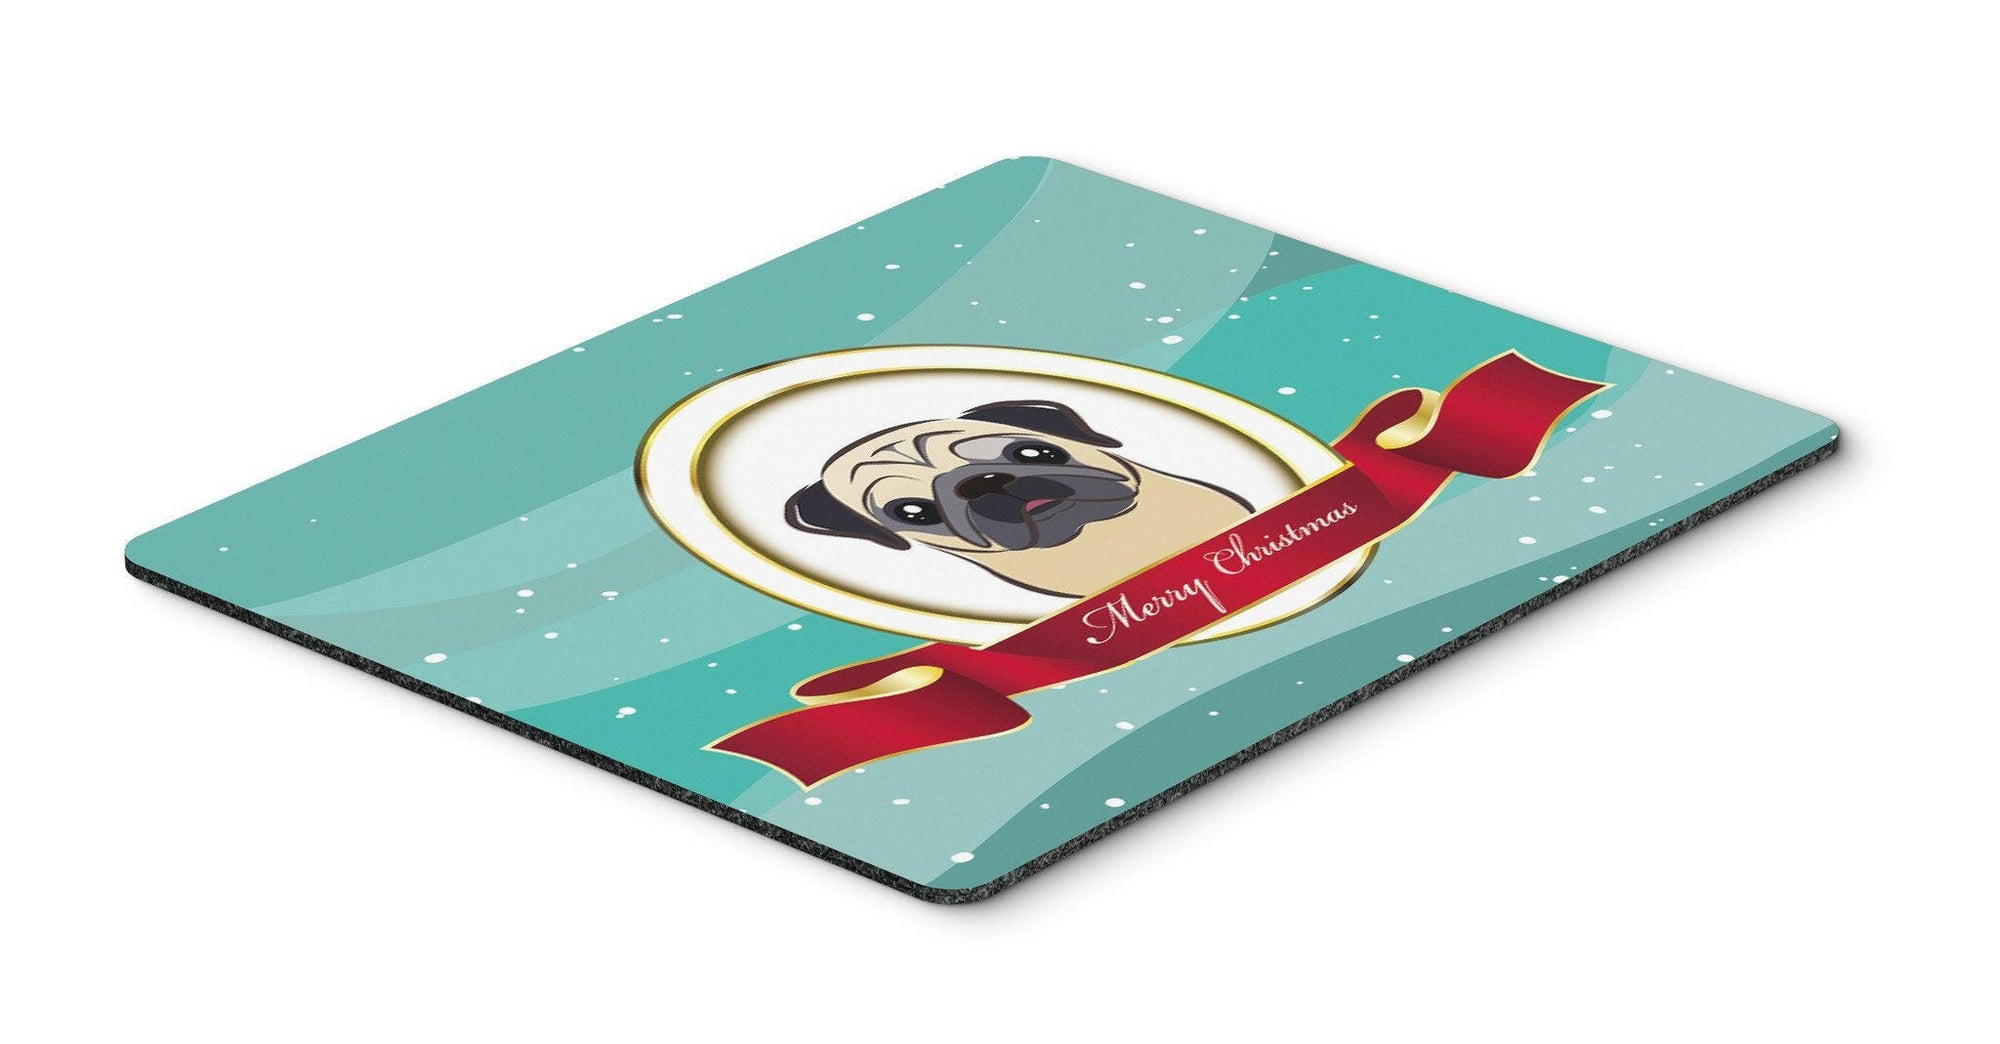 Fawn Pug Merry Christmas Mouse Pad, Hot Pad or Trivet BB1572MP by Caroline's Treasures